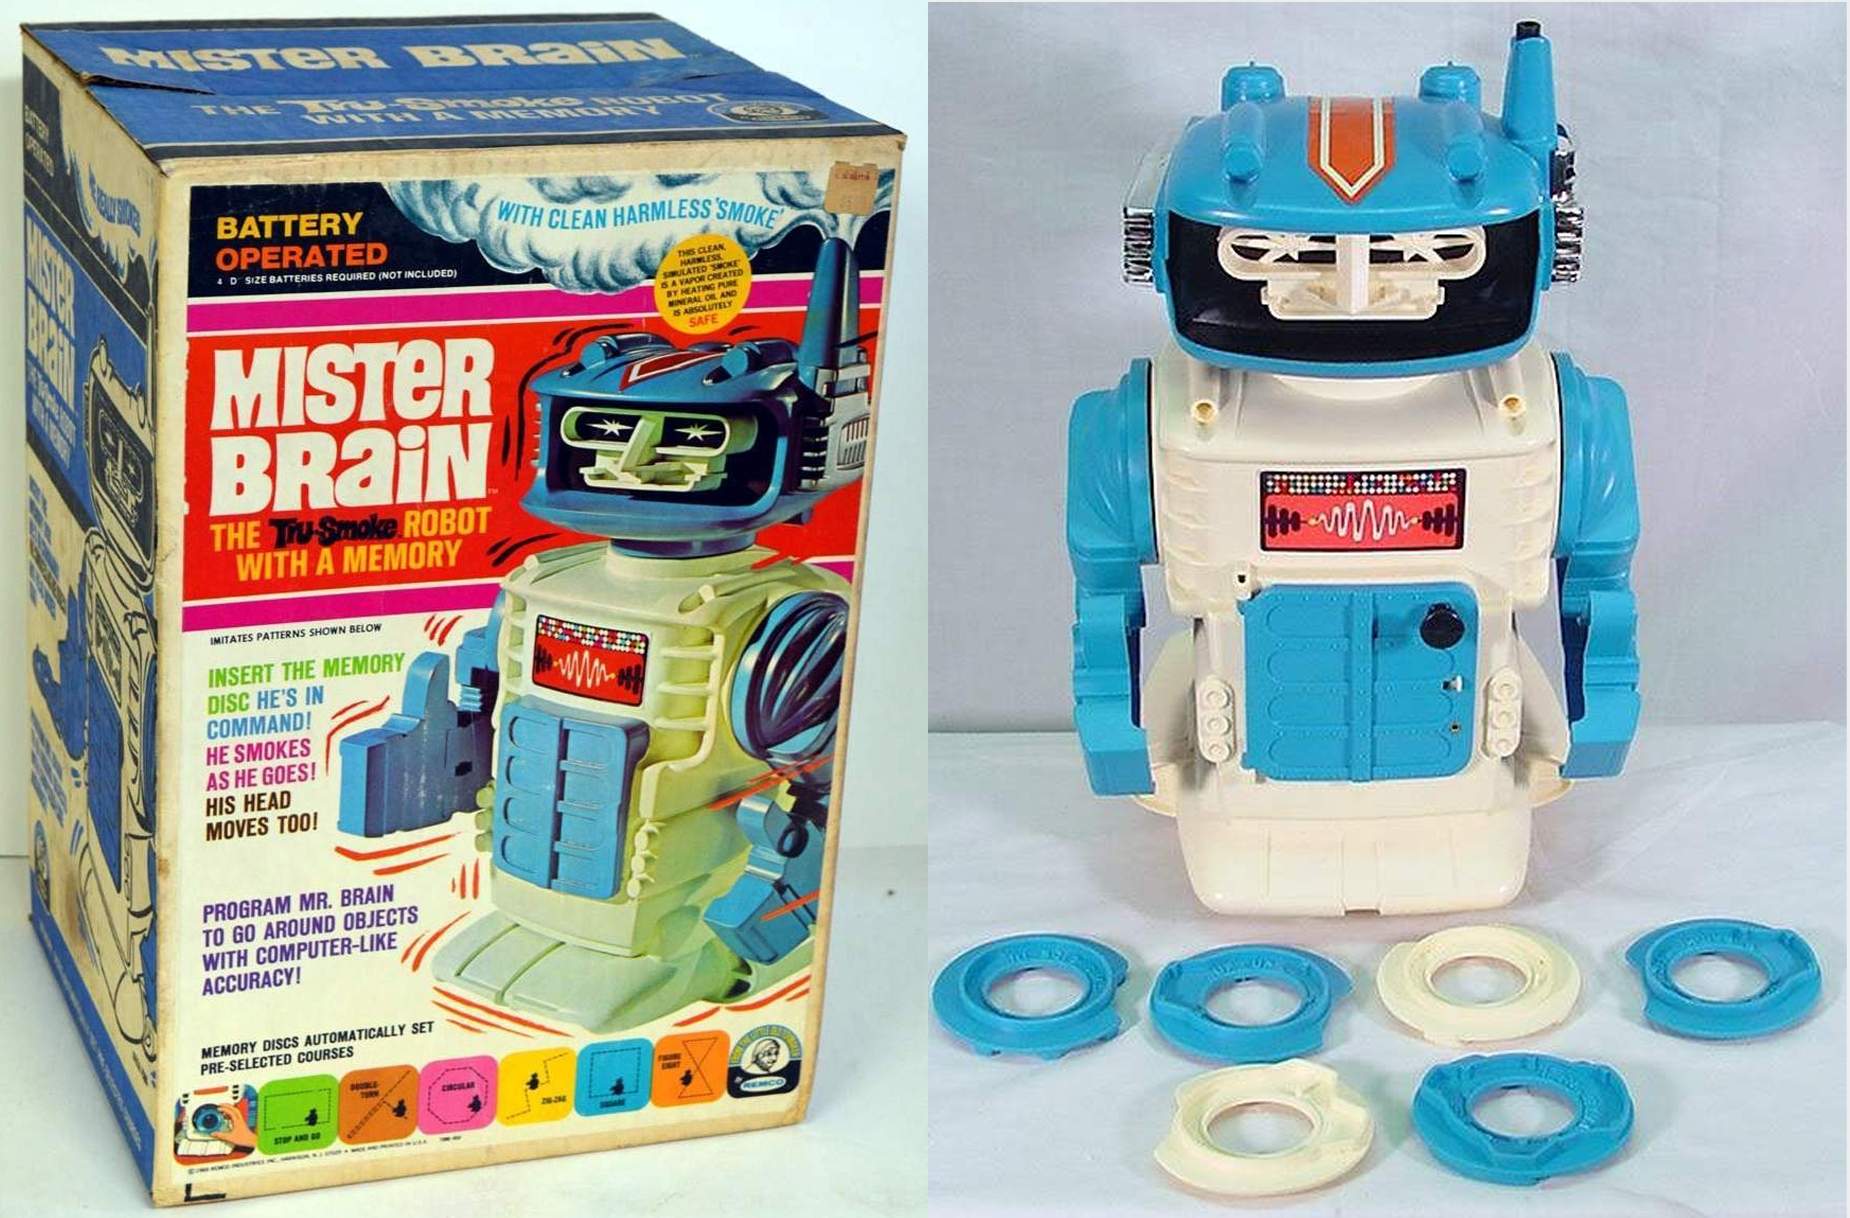 Mister Brain by Remco 1969 - The Old Robots Web Site, mister